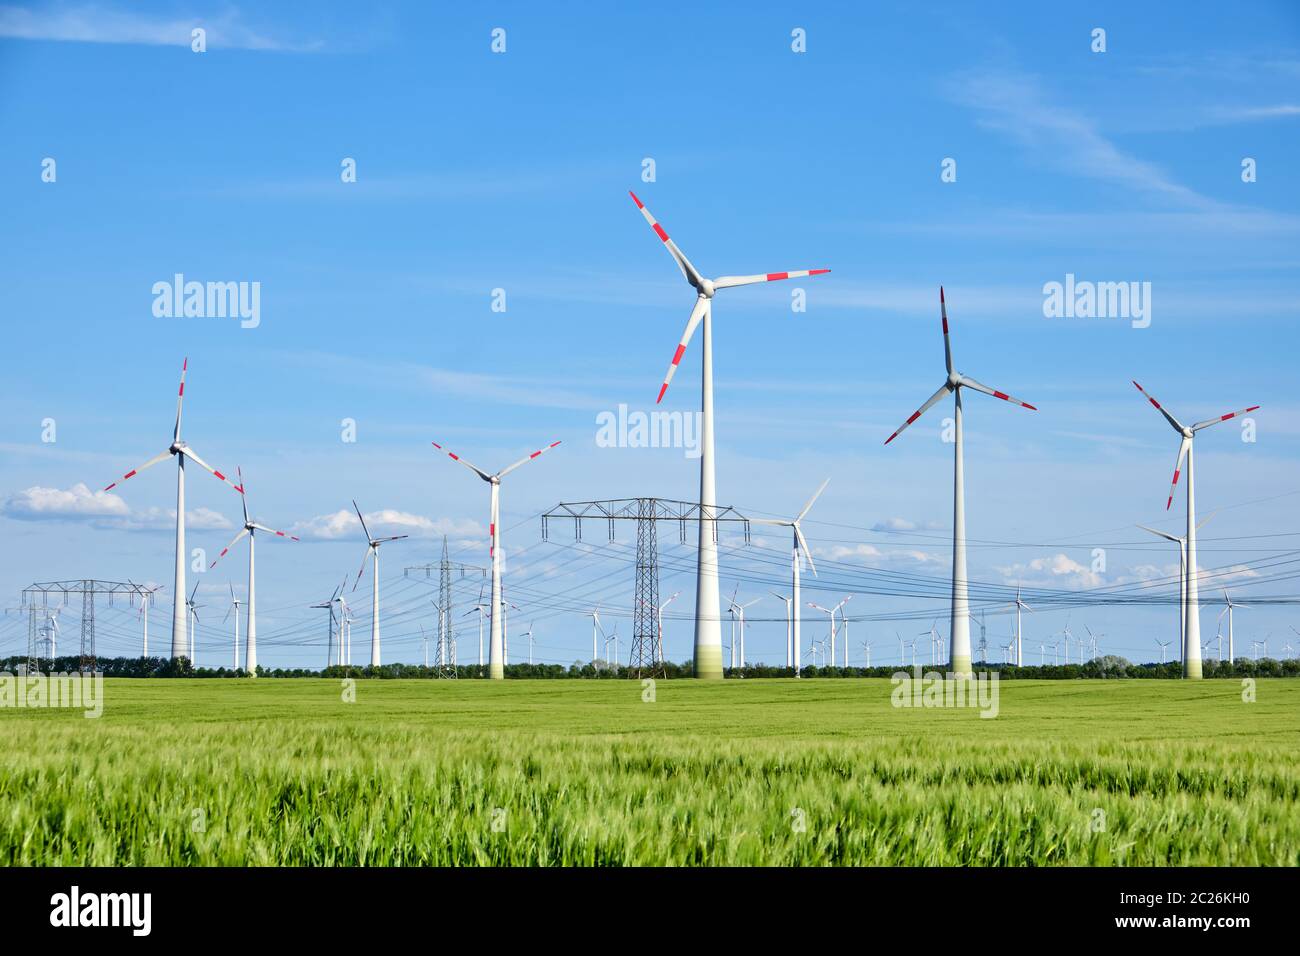 Wind wheels and overhead power lines seen in Germany Stock Photo